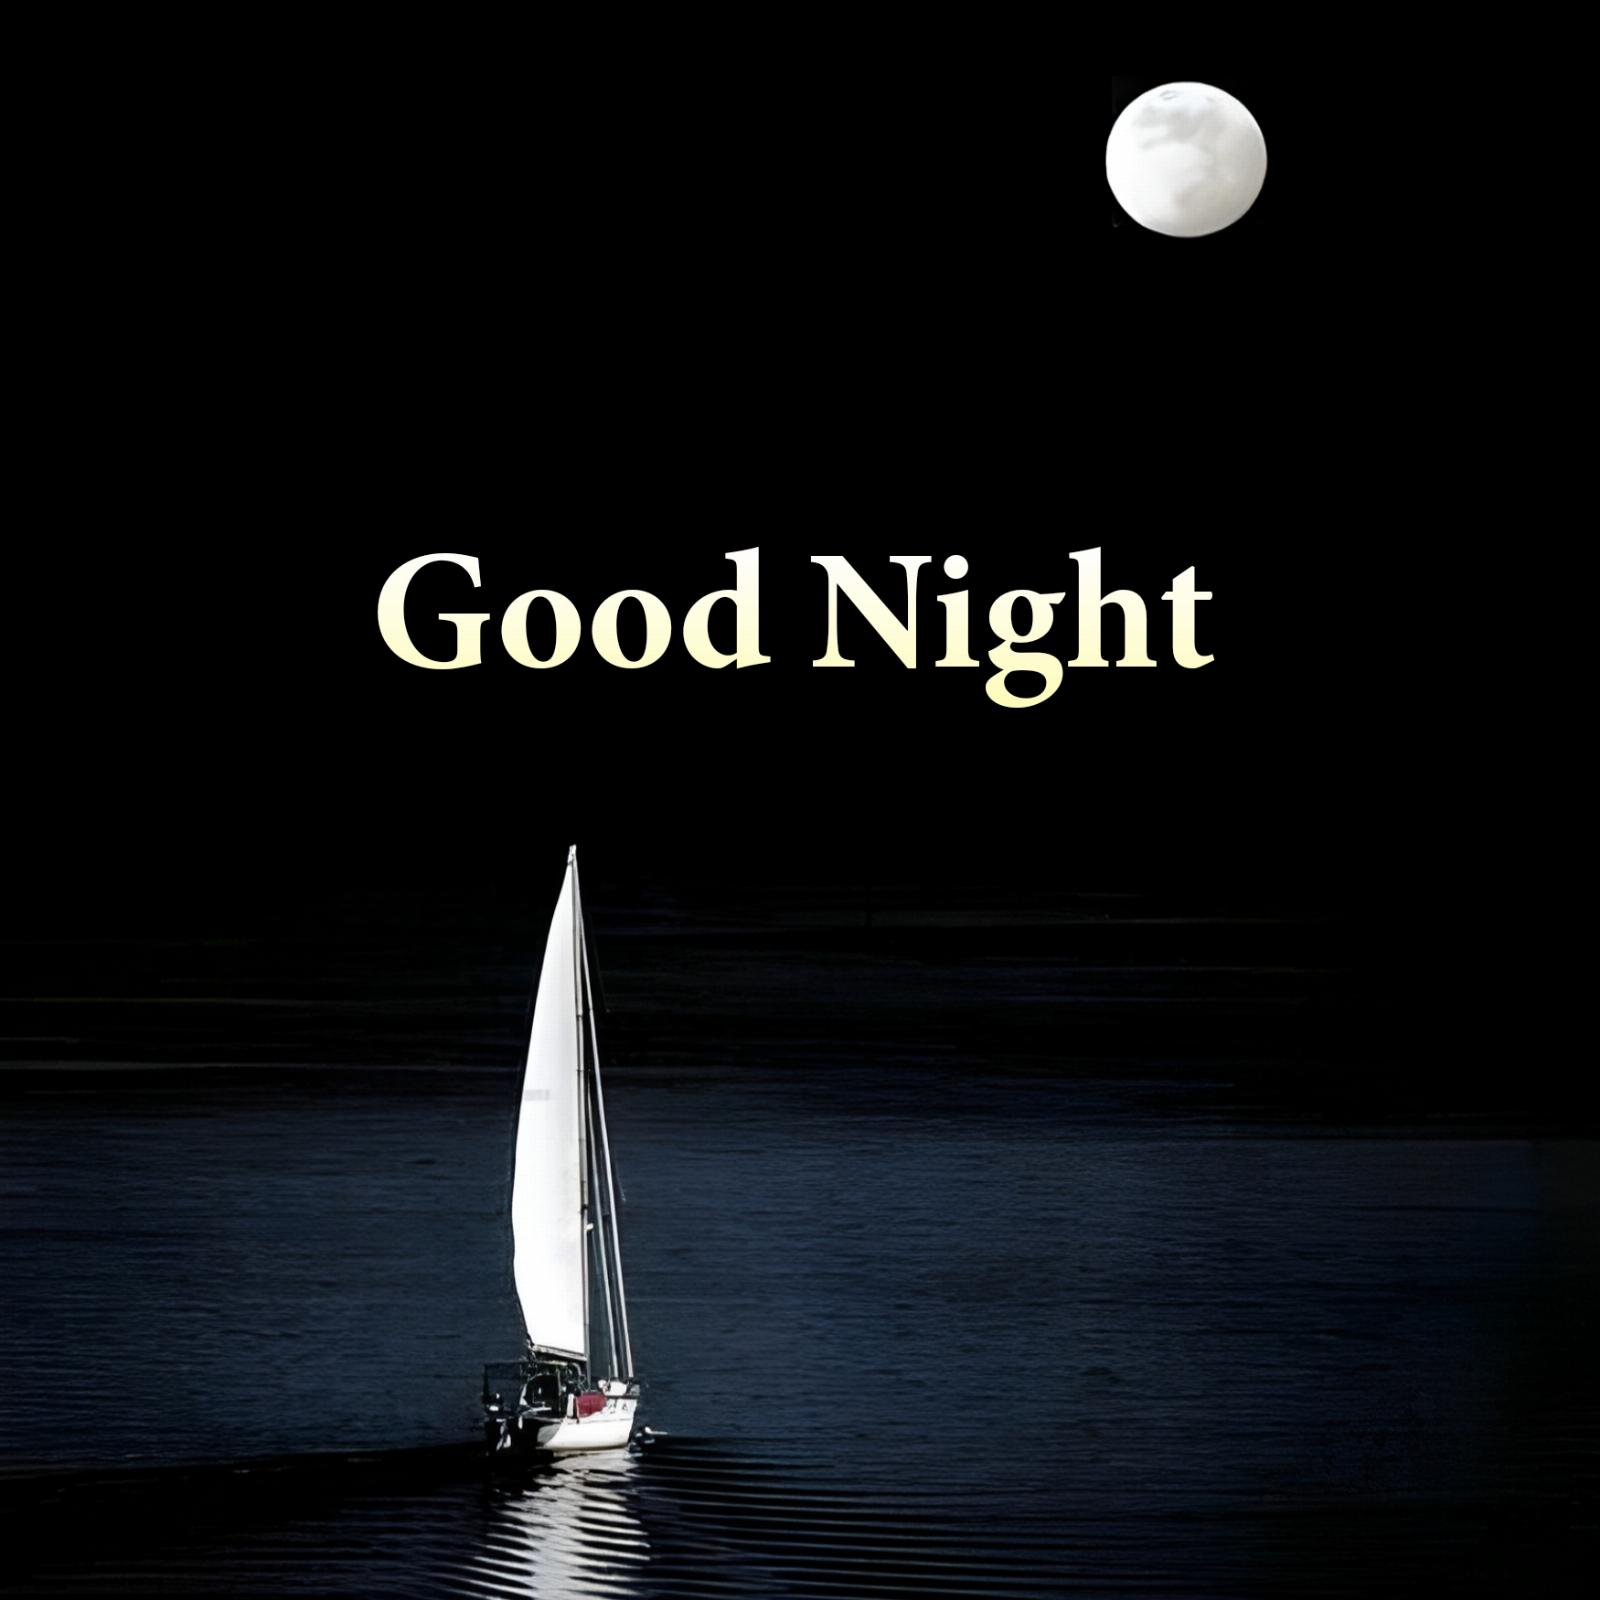 Good Night Moon Boat Images